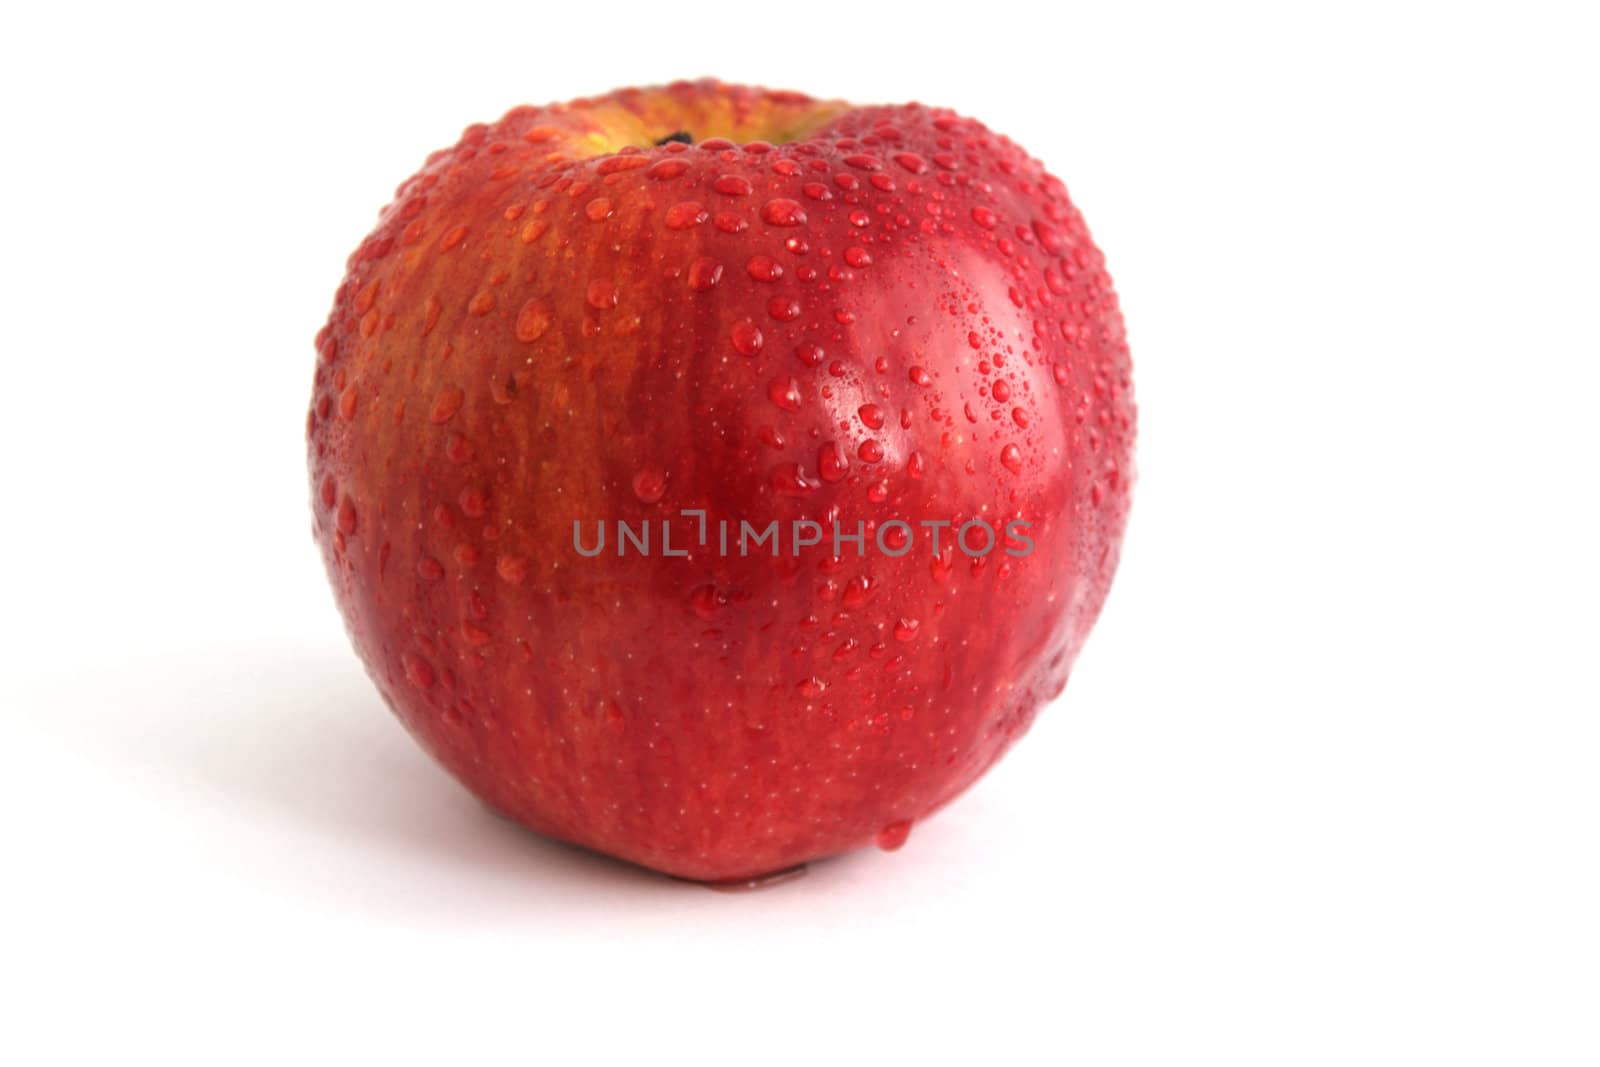 red juicy apple  isolated on white background